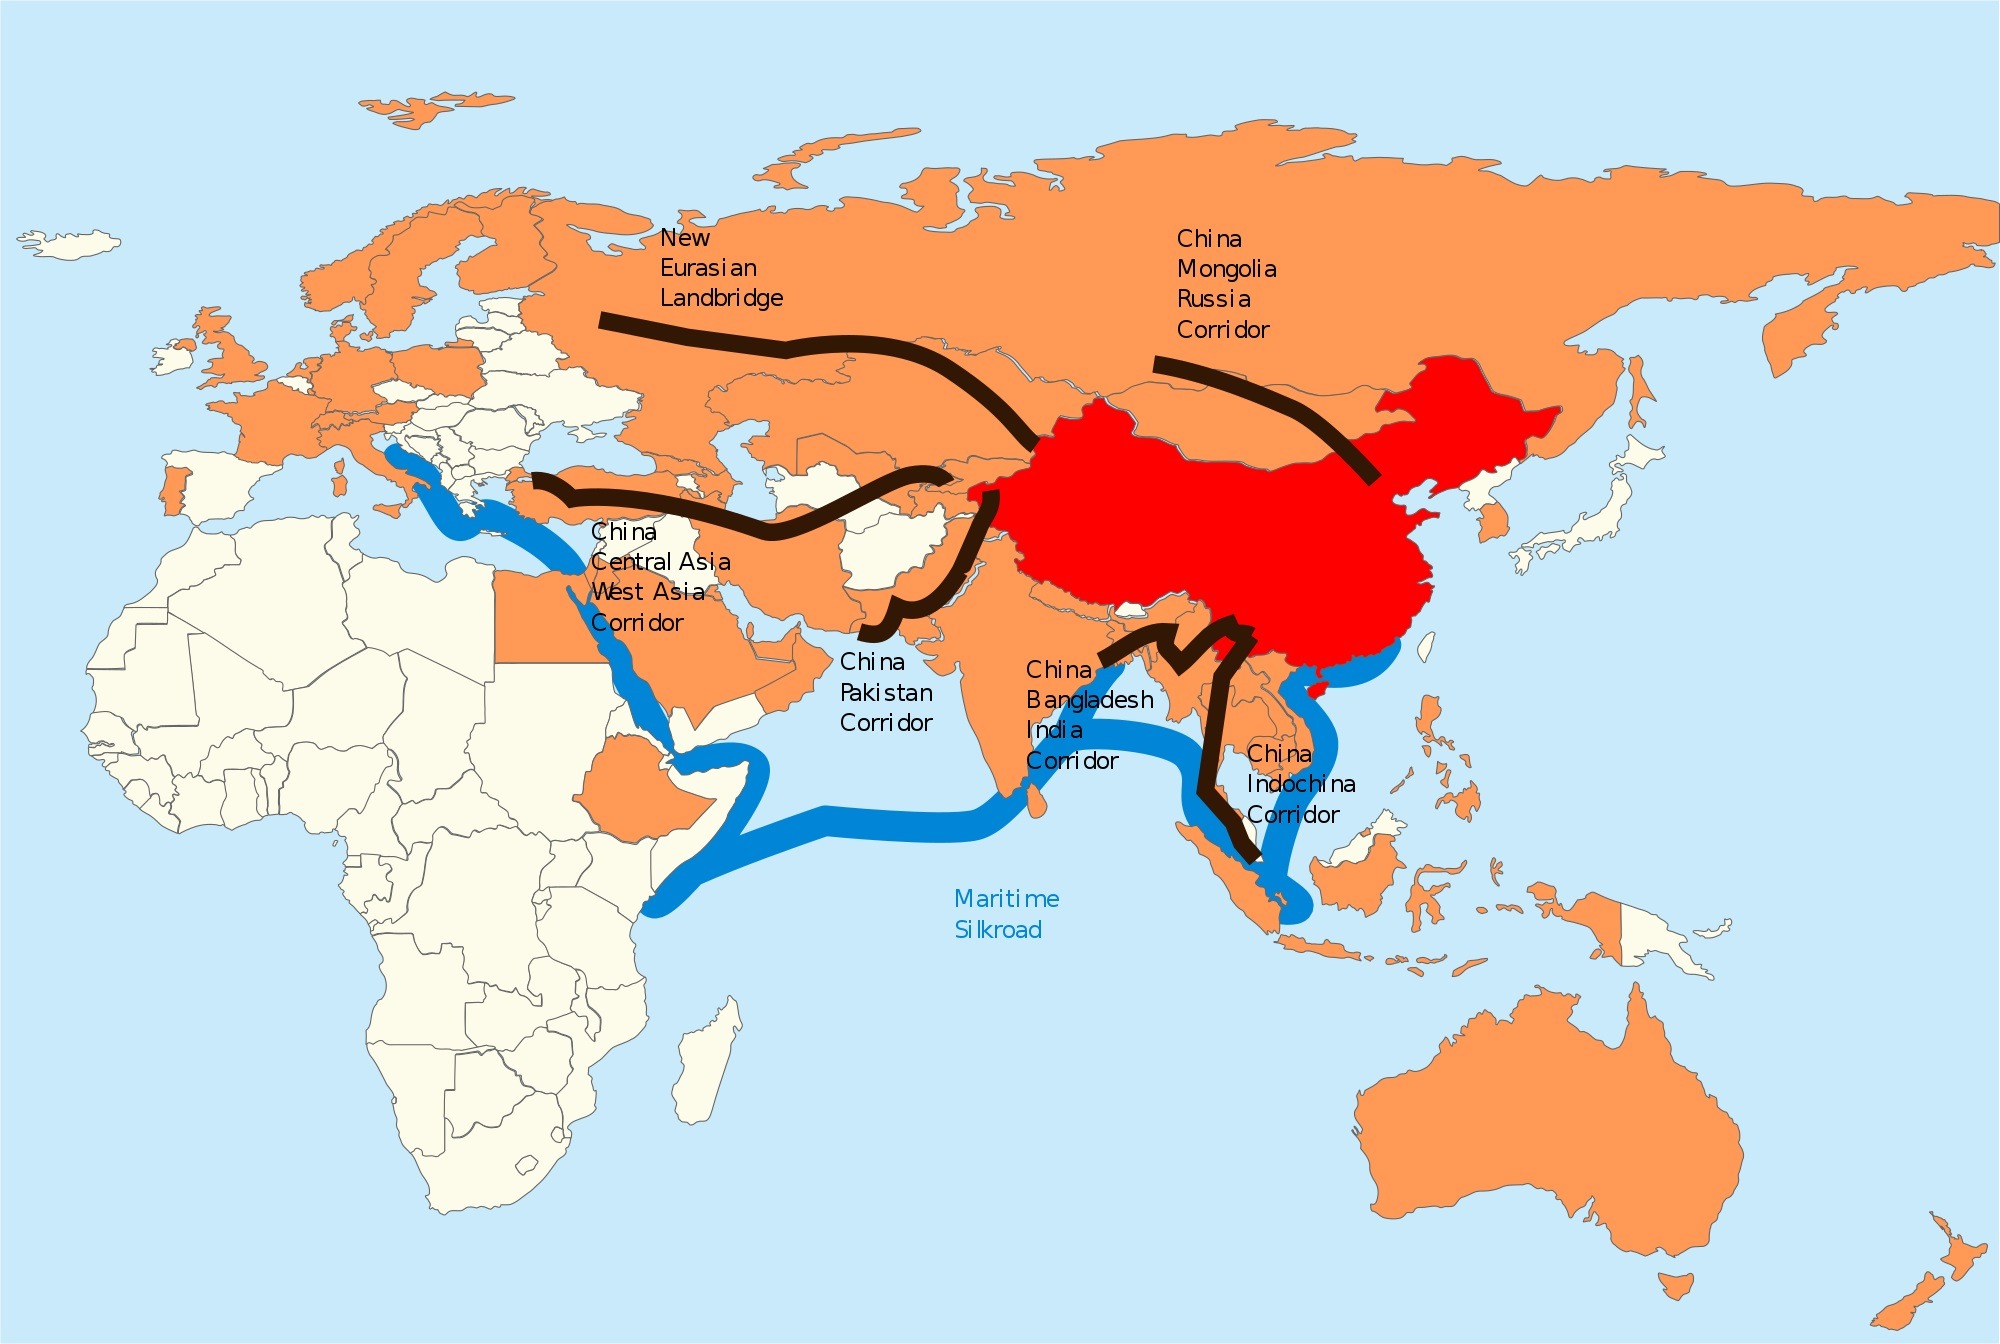 Geopolitical and Economic Implications of the Belt and Road Initiative - The Geopolitics